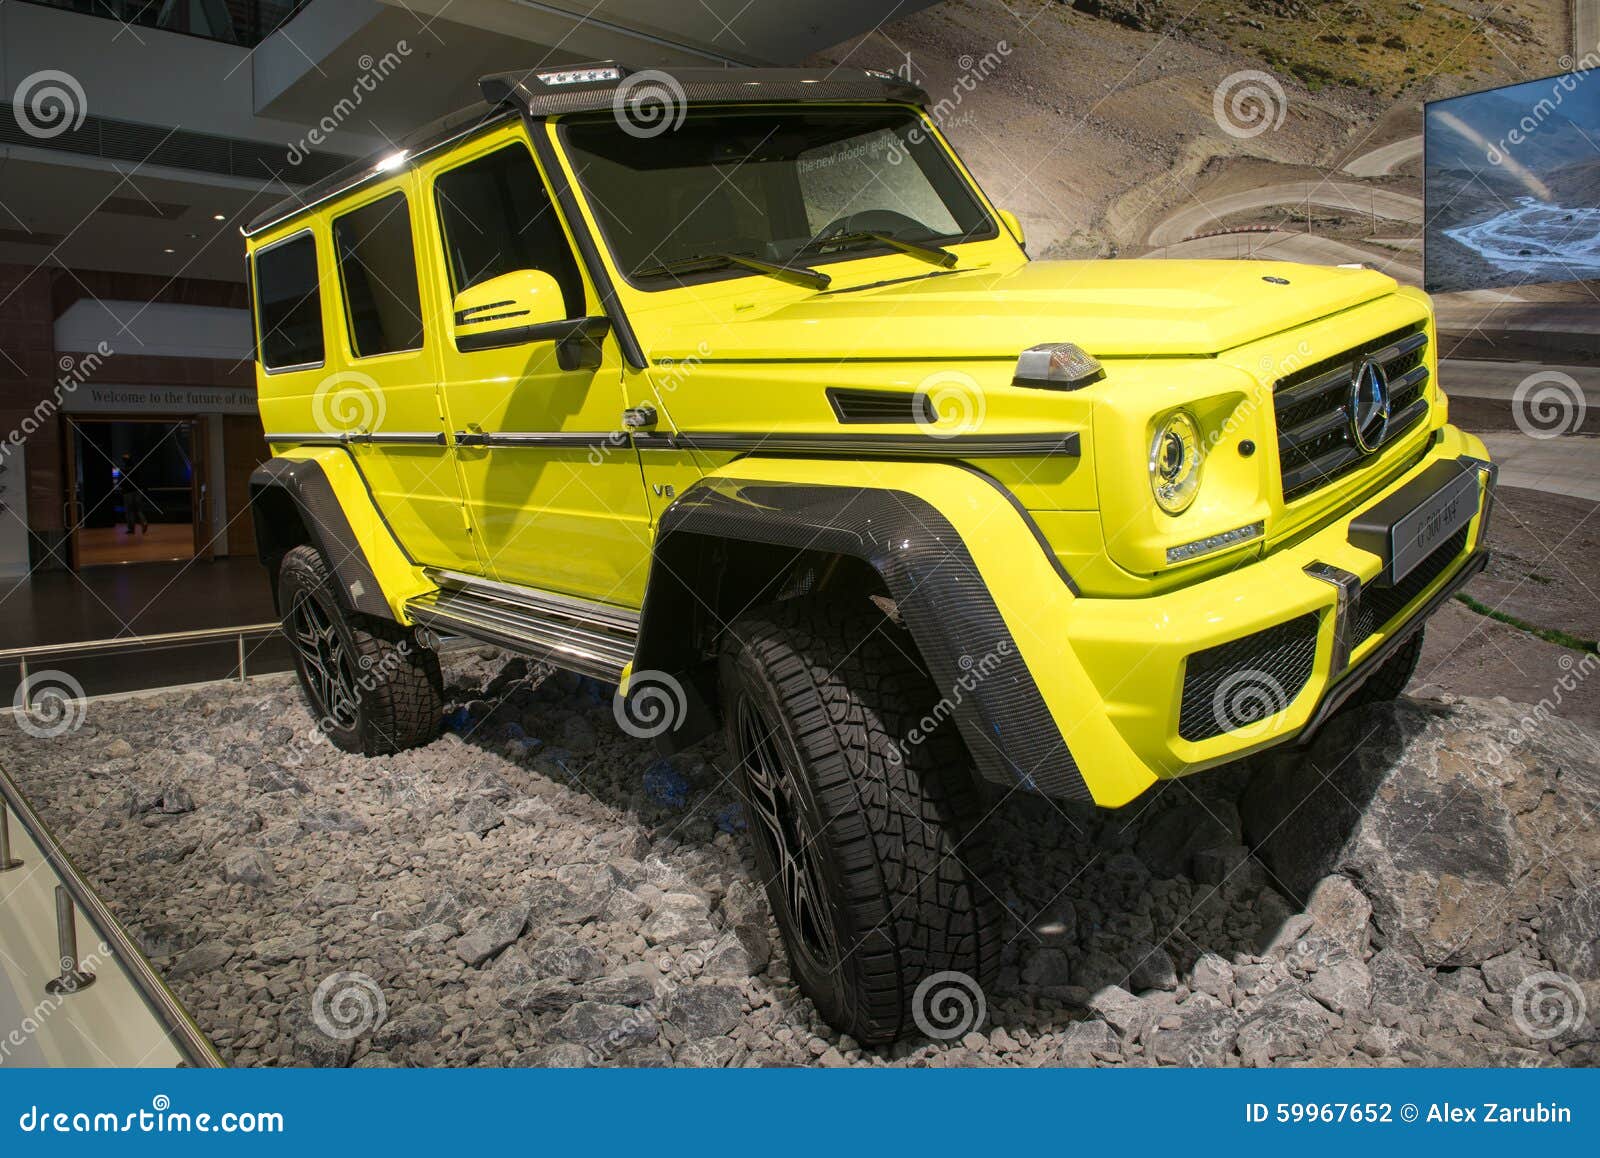 Mercedes Benz G 500 4x4 Editorial Photography Image Of Lifestyle 59967652